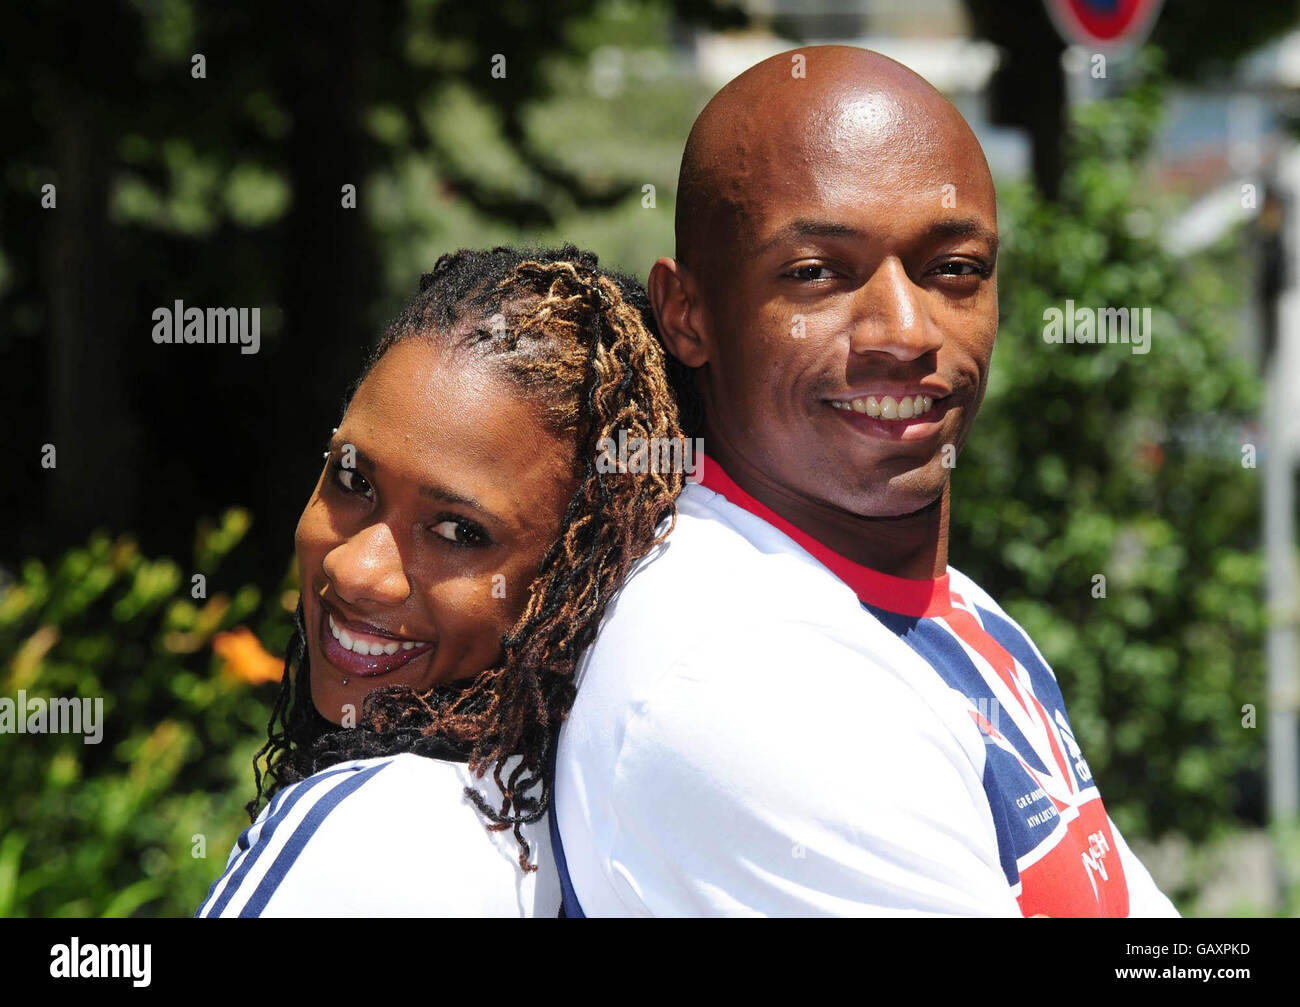 Athletics - 2008 Spar European Cup - Annecy. Great Britain European Cup team captain's Natasha Danvers and Marlon Devonish during a photo call in Annecy, France. Stock Photo